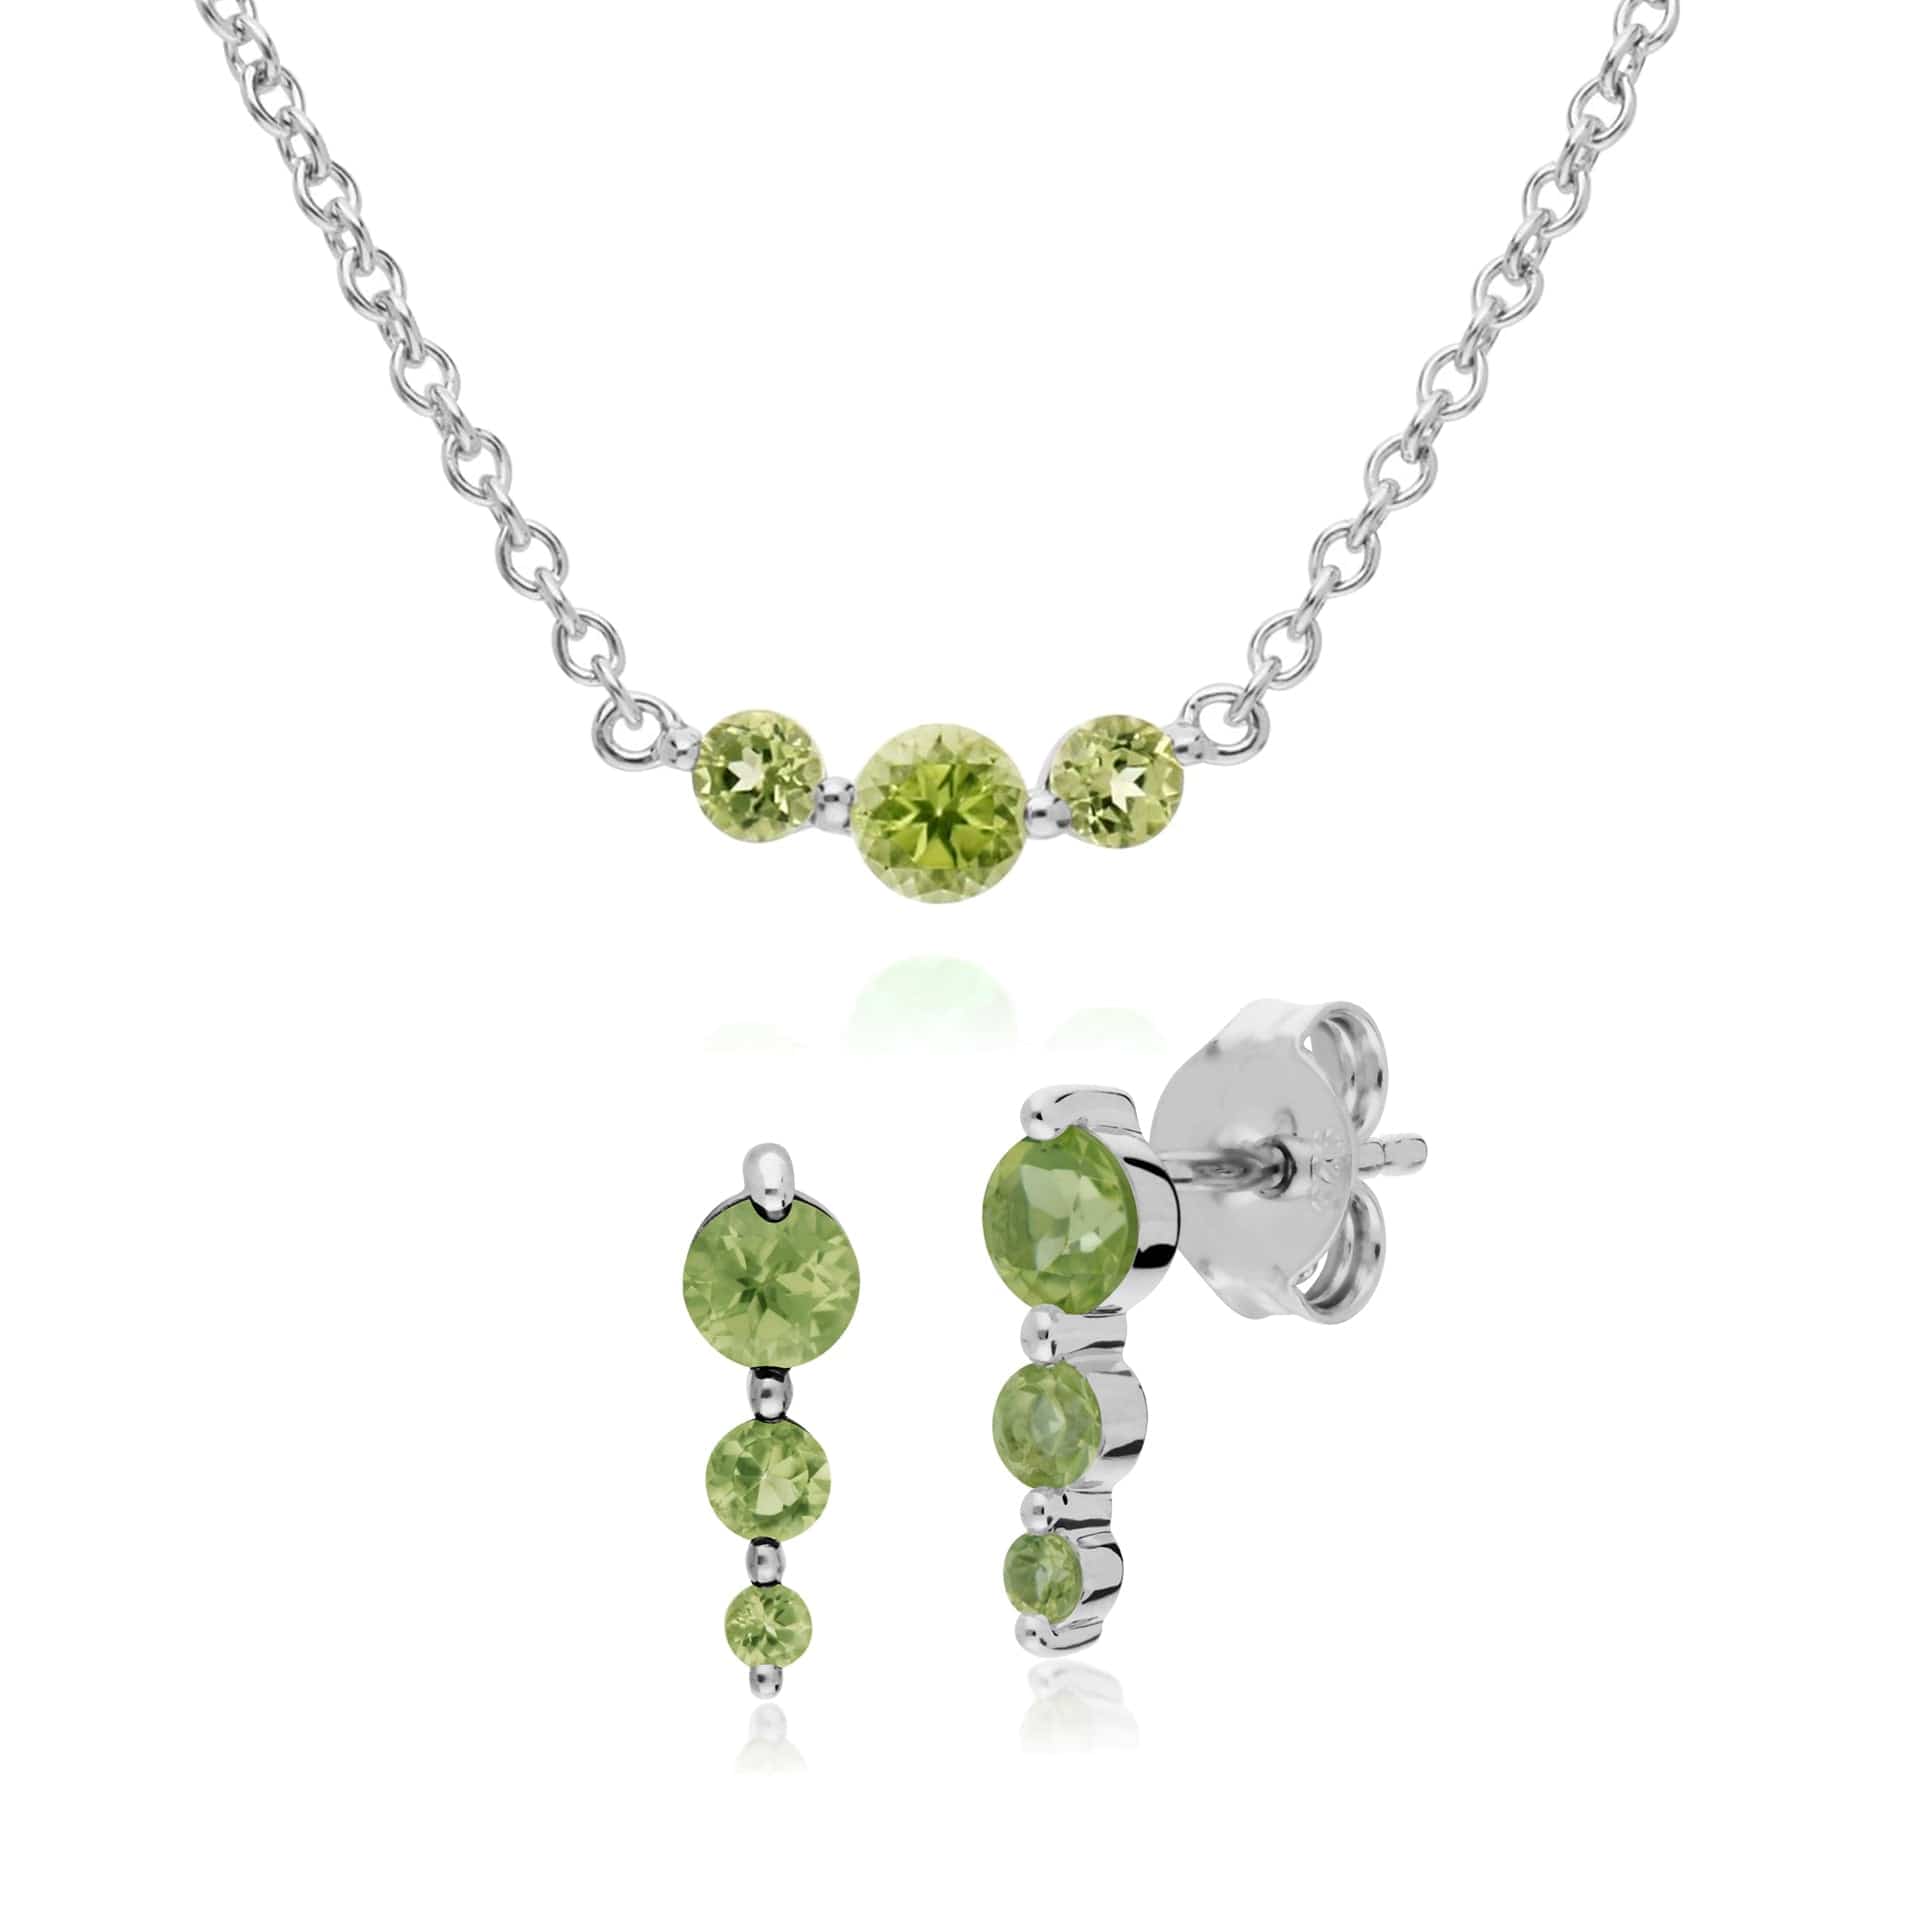 270E025504925-270N034204925 Classic Round Peridot Three Stone Gradient Earrings & Necklace Set in 925 Sterling Silver 1